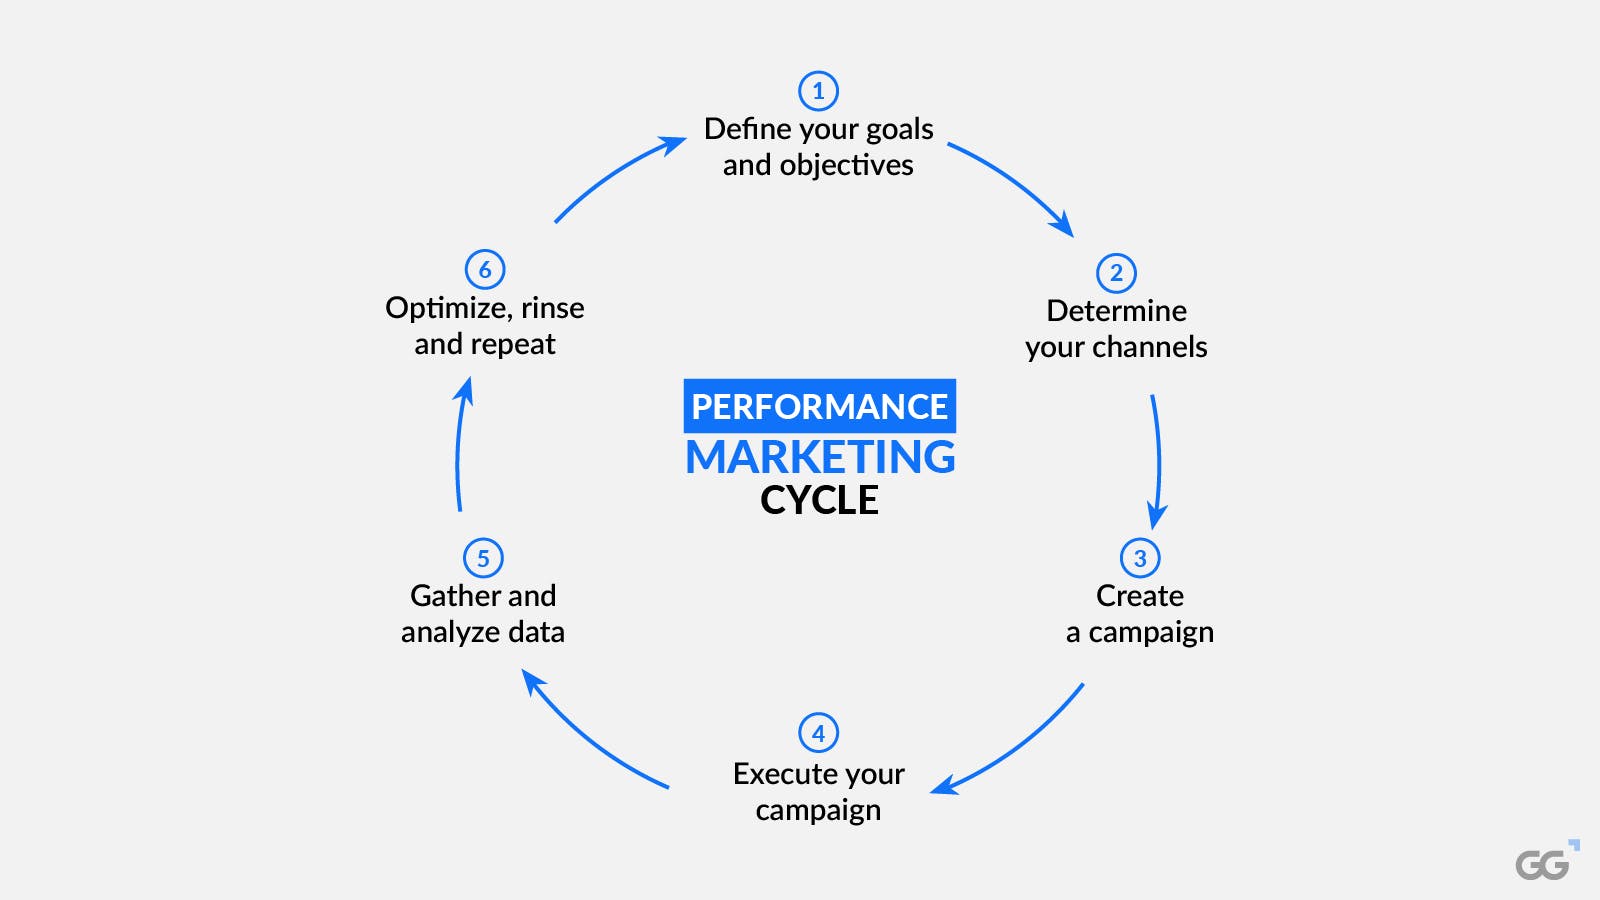 A visual representation of the performance marketing cycle, including the stages of planning, execution, optimization, and analysis.